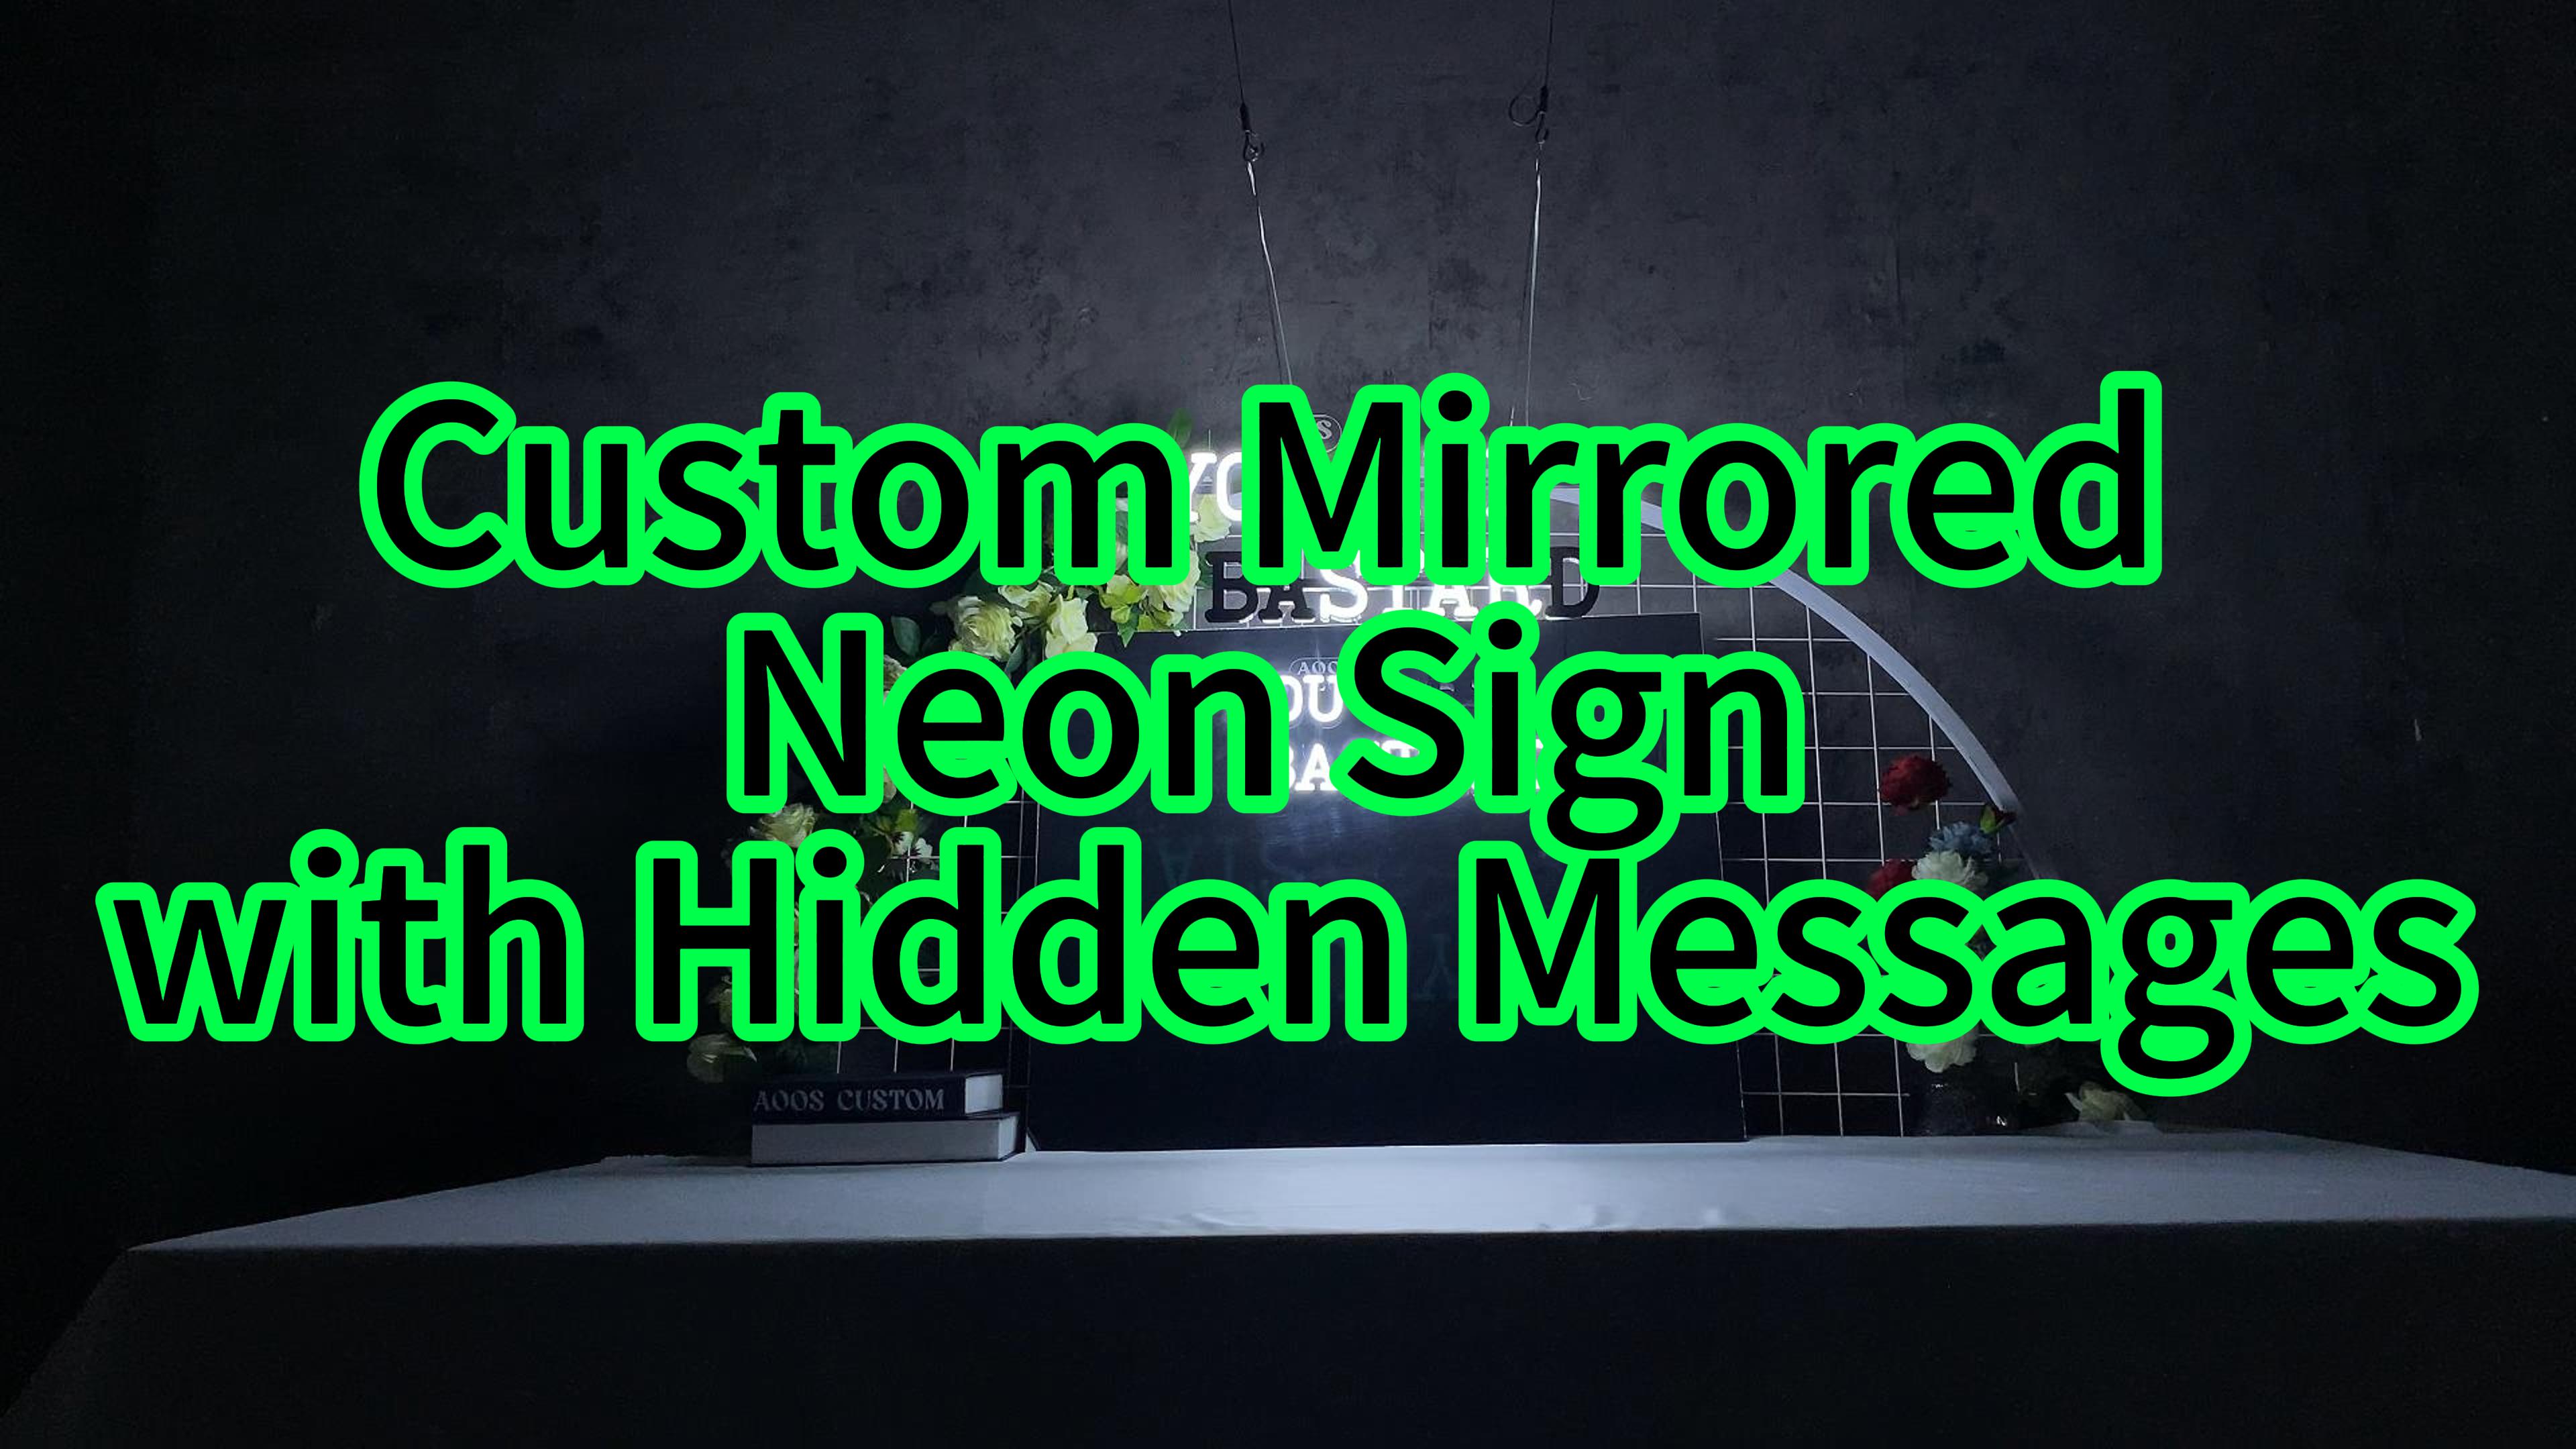 Custom Mirrored Neon Sign with Hidden Messages